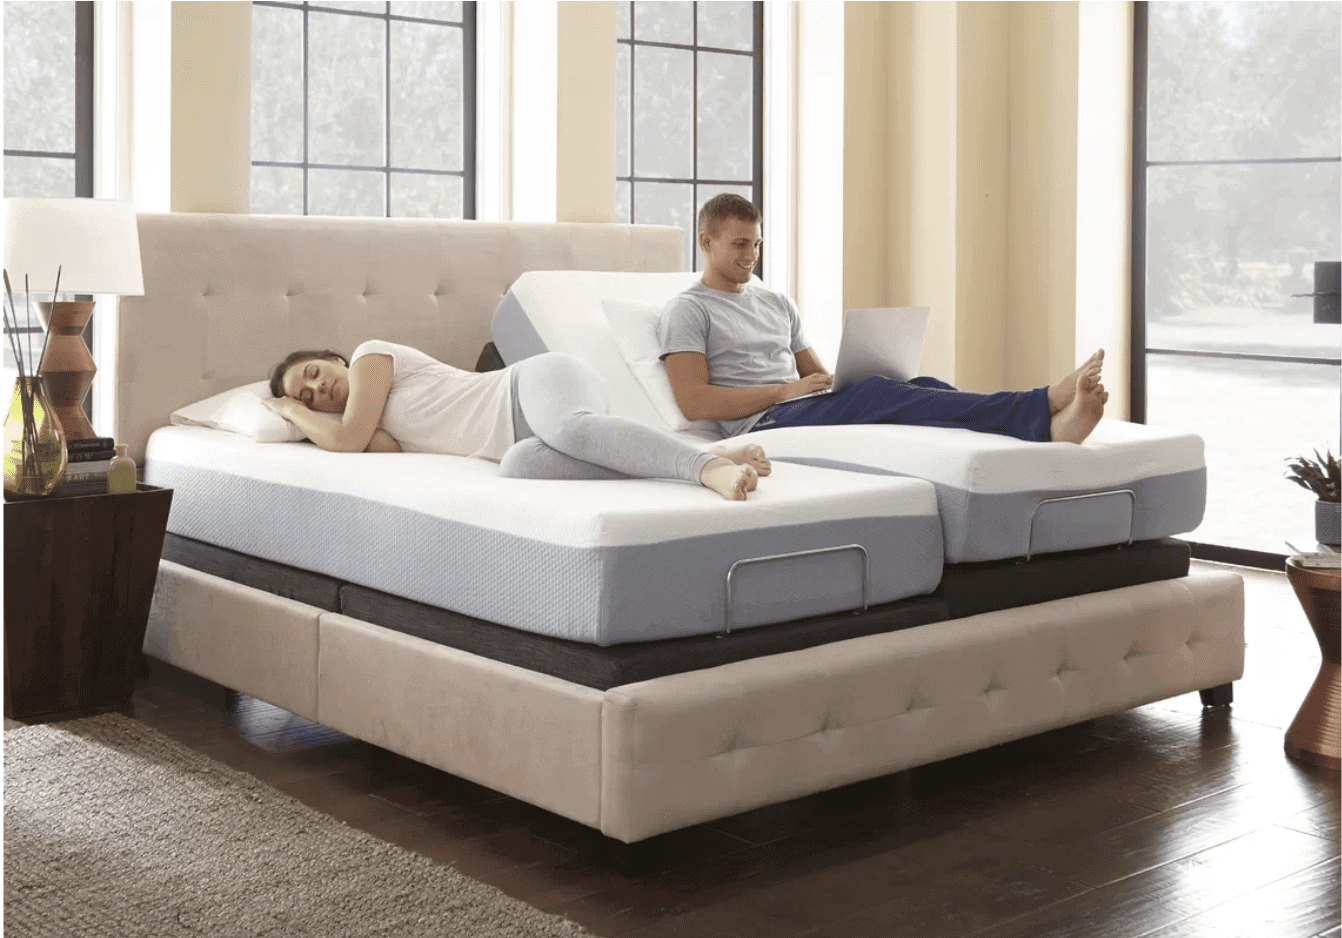 can i buy any mattress for adjustable base